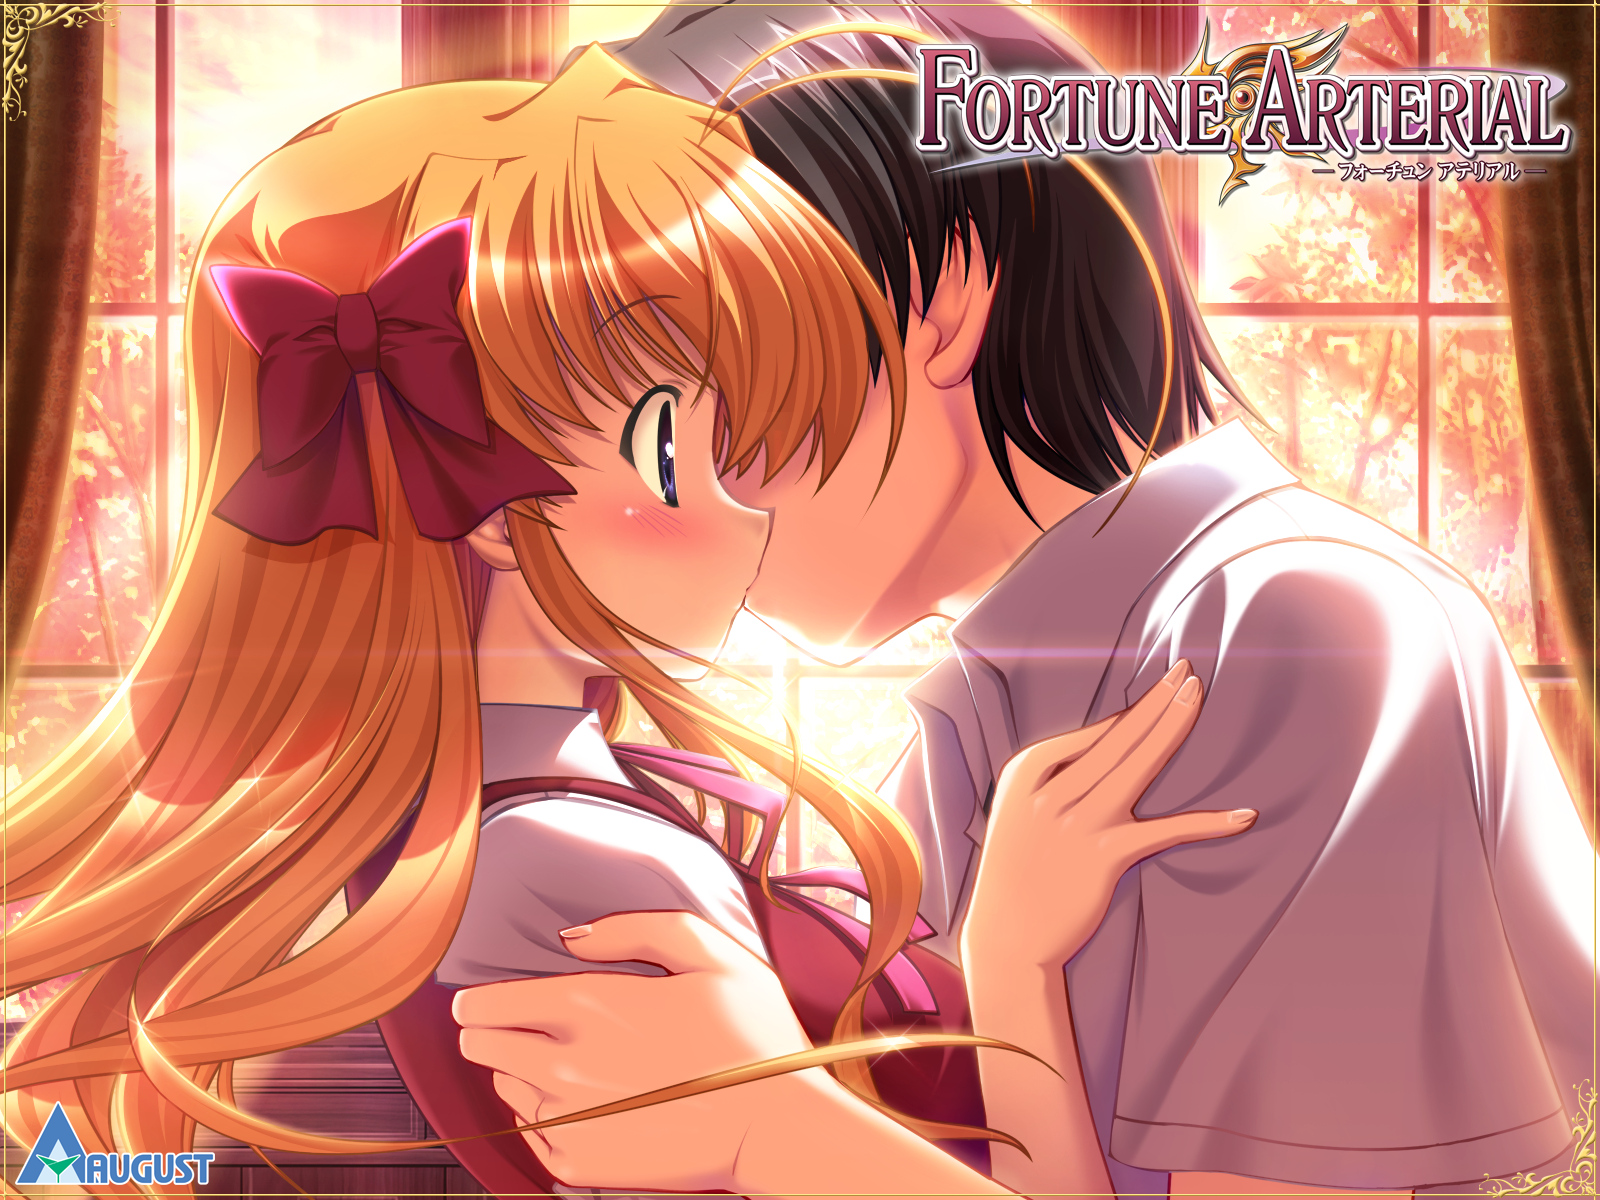 1600x1200 > Fortune Arterial Wallpapers